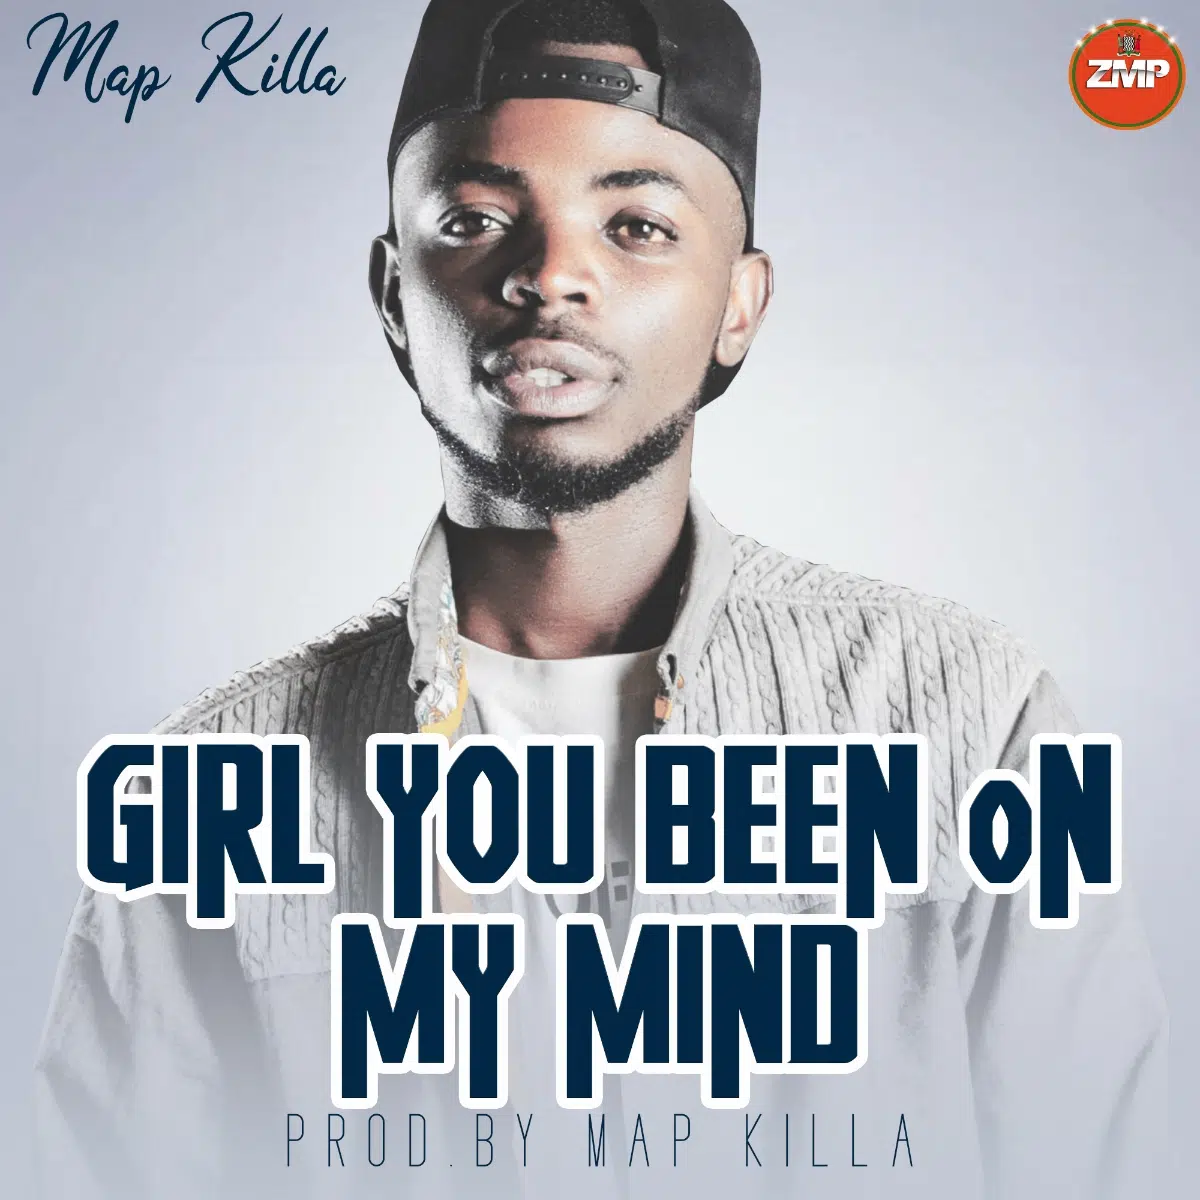 DOWNLOAD: Map Killa – “Girl You Are On My Mind” Mp3